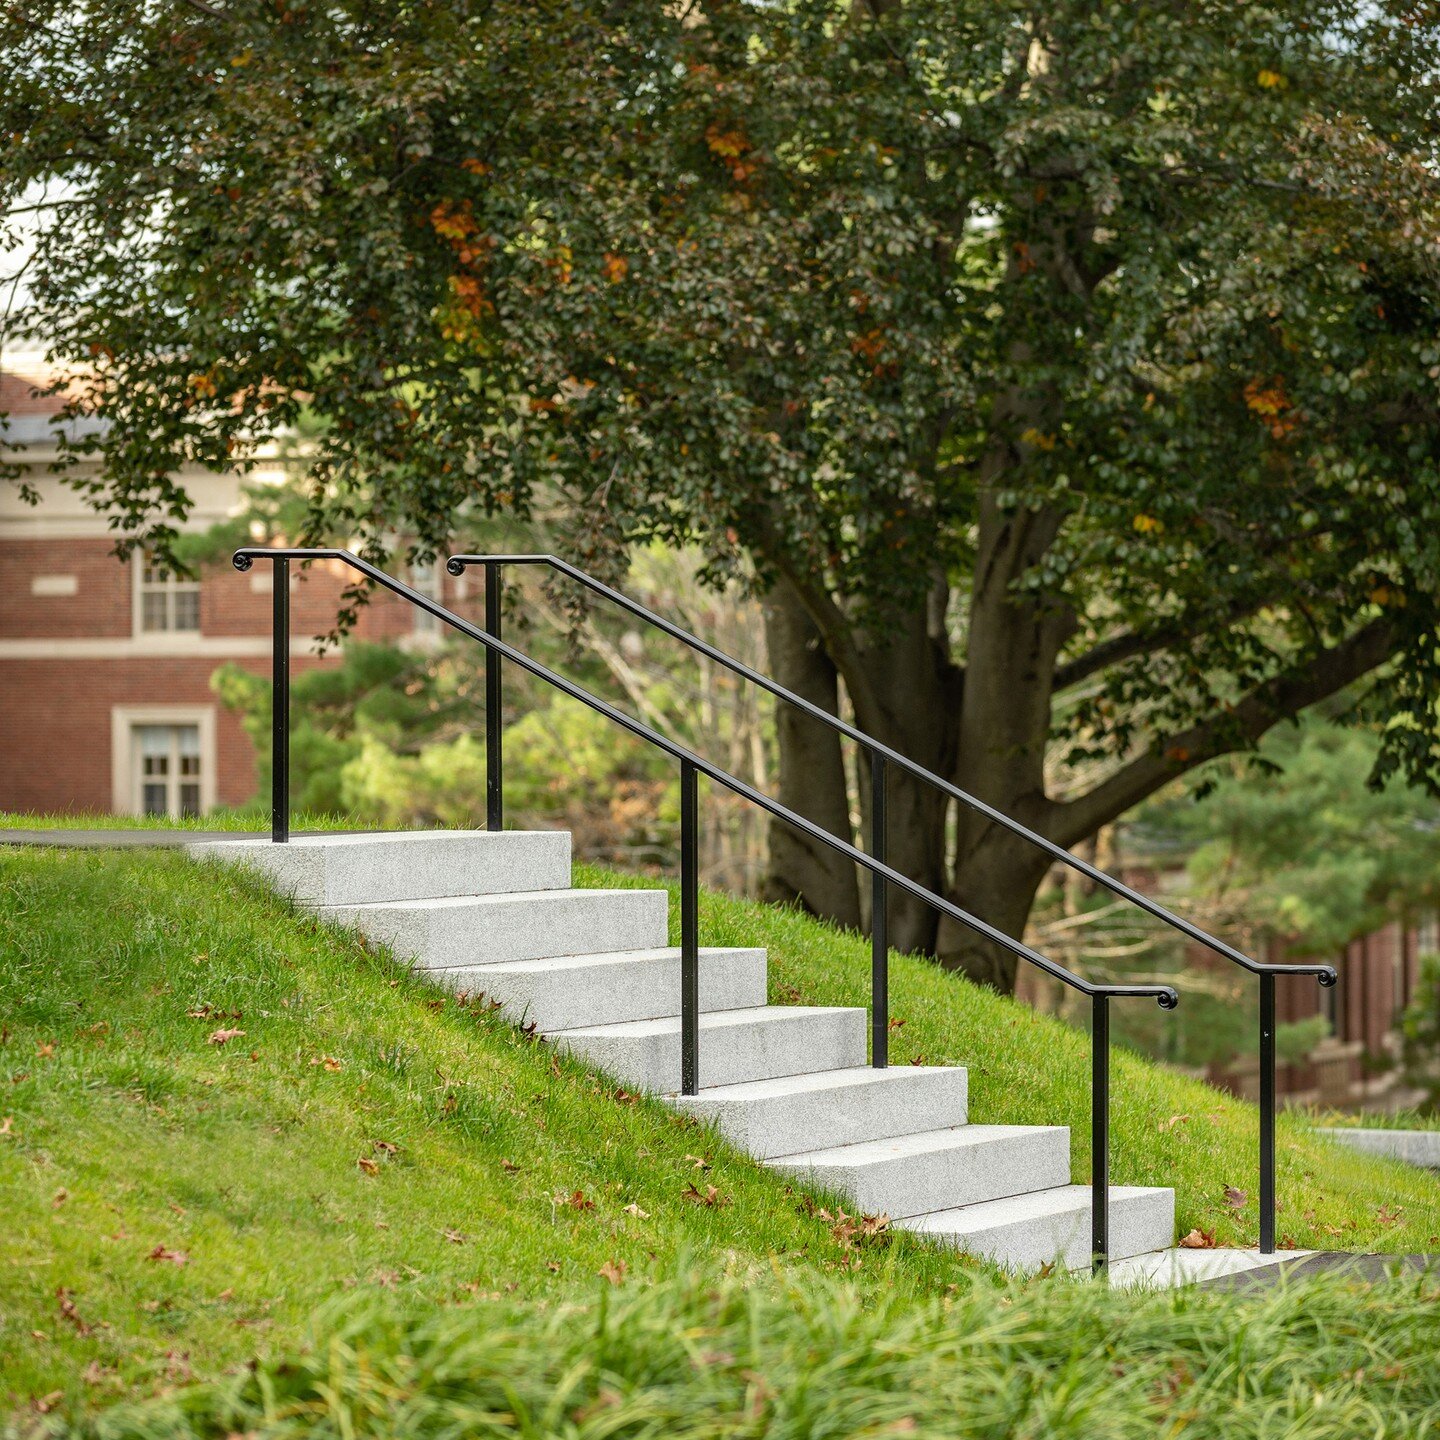 The clean lines of these solid #granite steps showcase the elegance of simple #designdetails.

@crucinski_ @candharchitects @scapesbuilders 

#wolalandarch #landscapedesign #landscapearchitecture #landscape #thisislandscapearchitecture #newengland #w